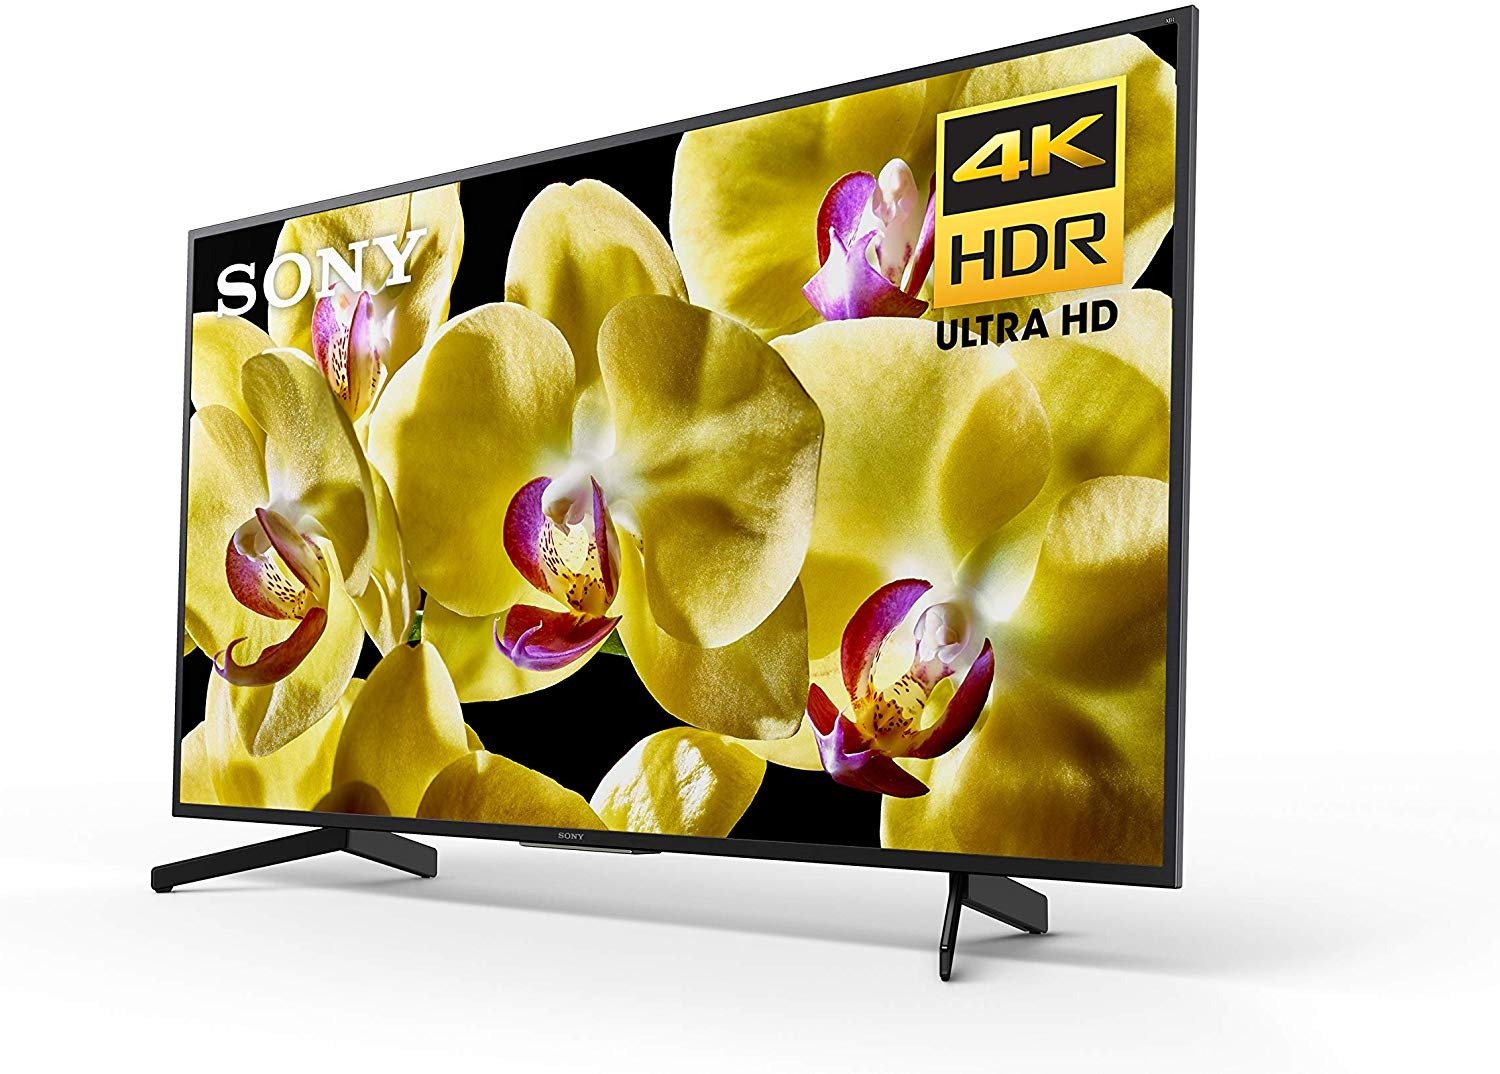 Sony Xbr 43x800g 43 4k Hdr Price Specs And Best Deals 0564